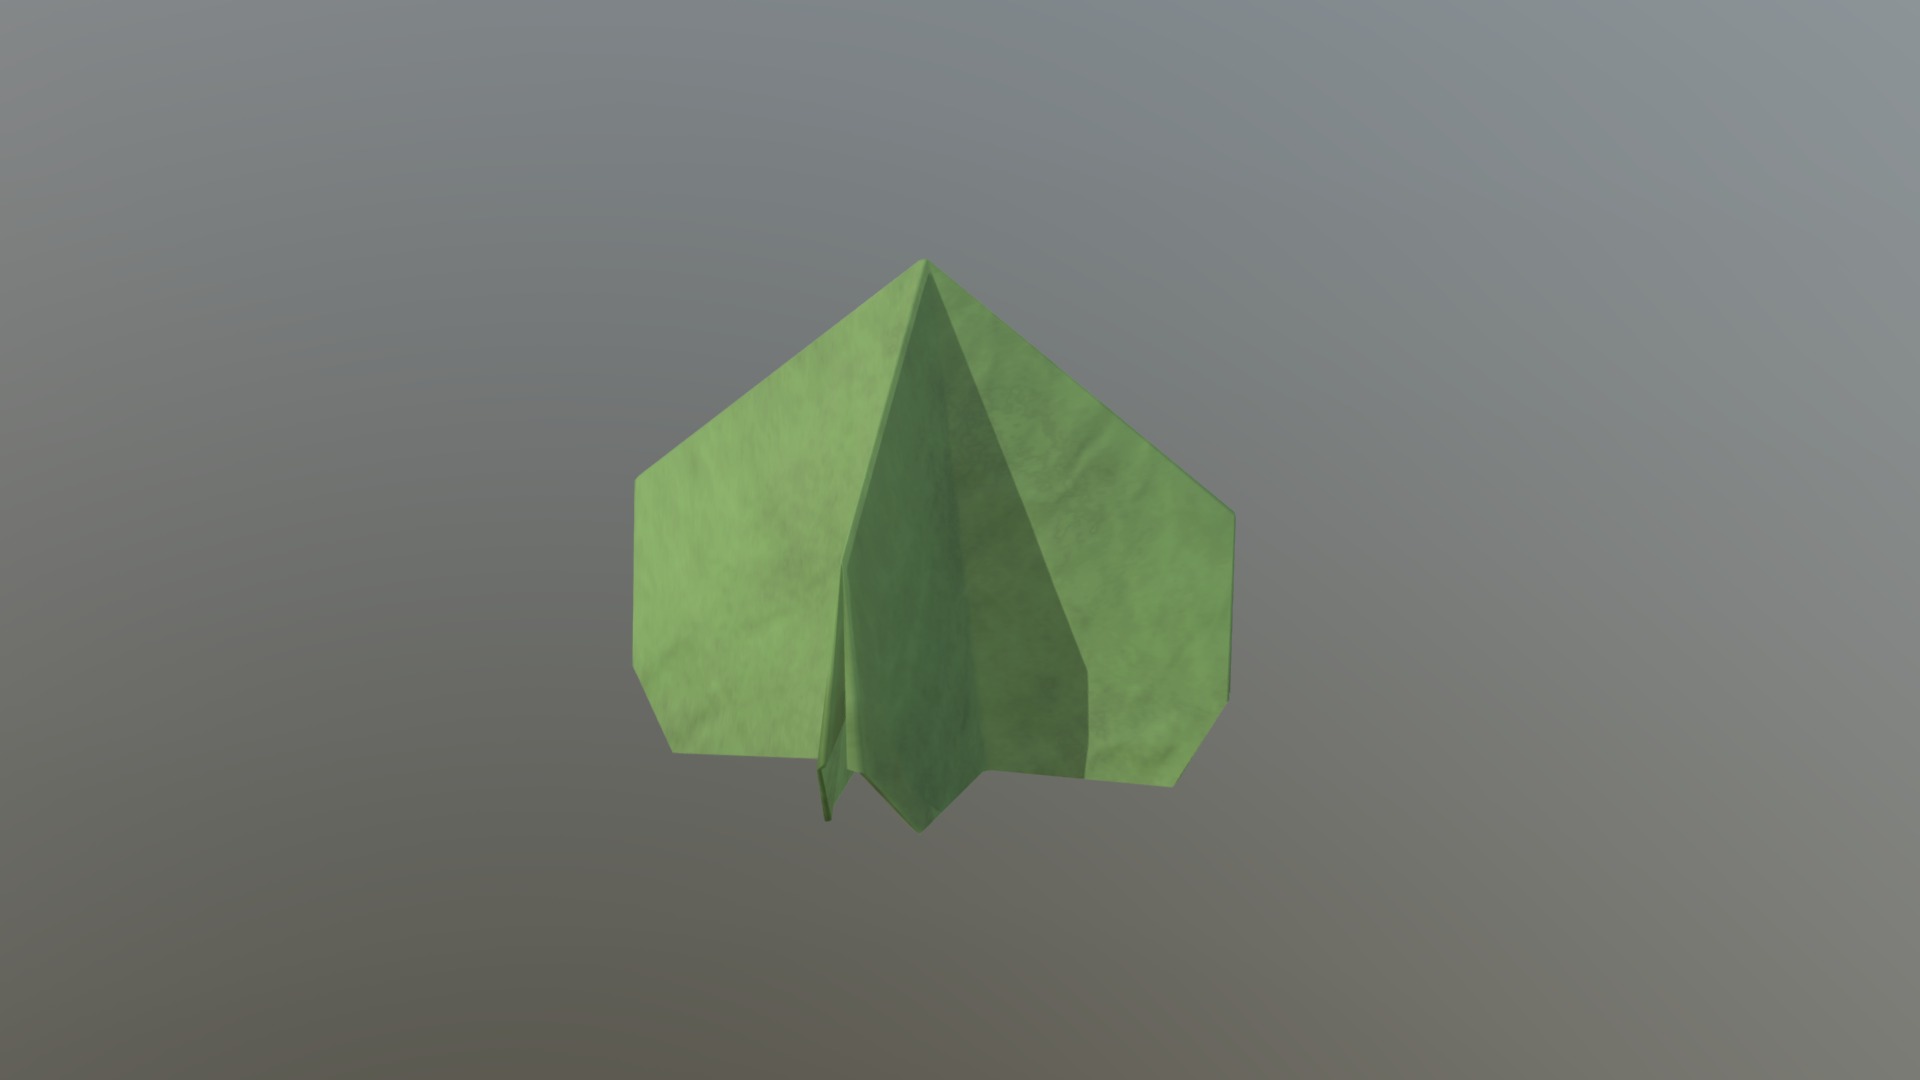 3D model Origami Bush 4 Sided - This is a 3D model of the Origami Bush 4 Sided. The 3D model is about a green leaf on a grey background.